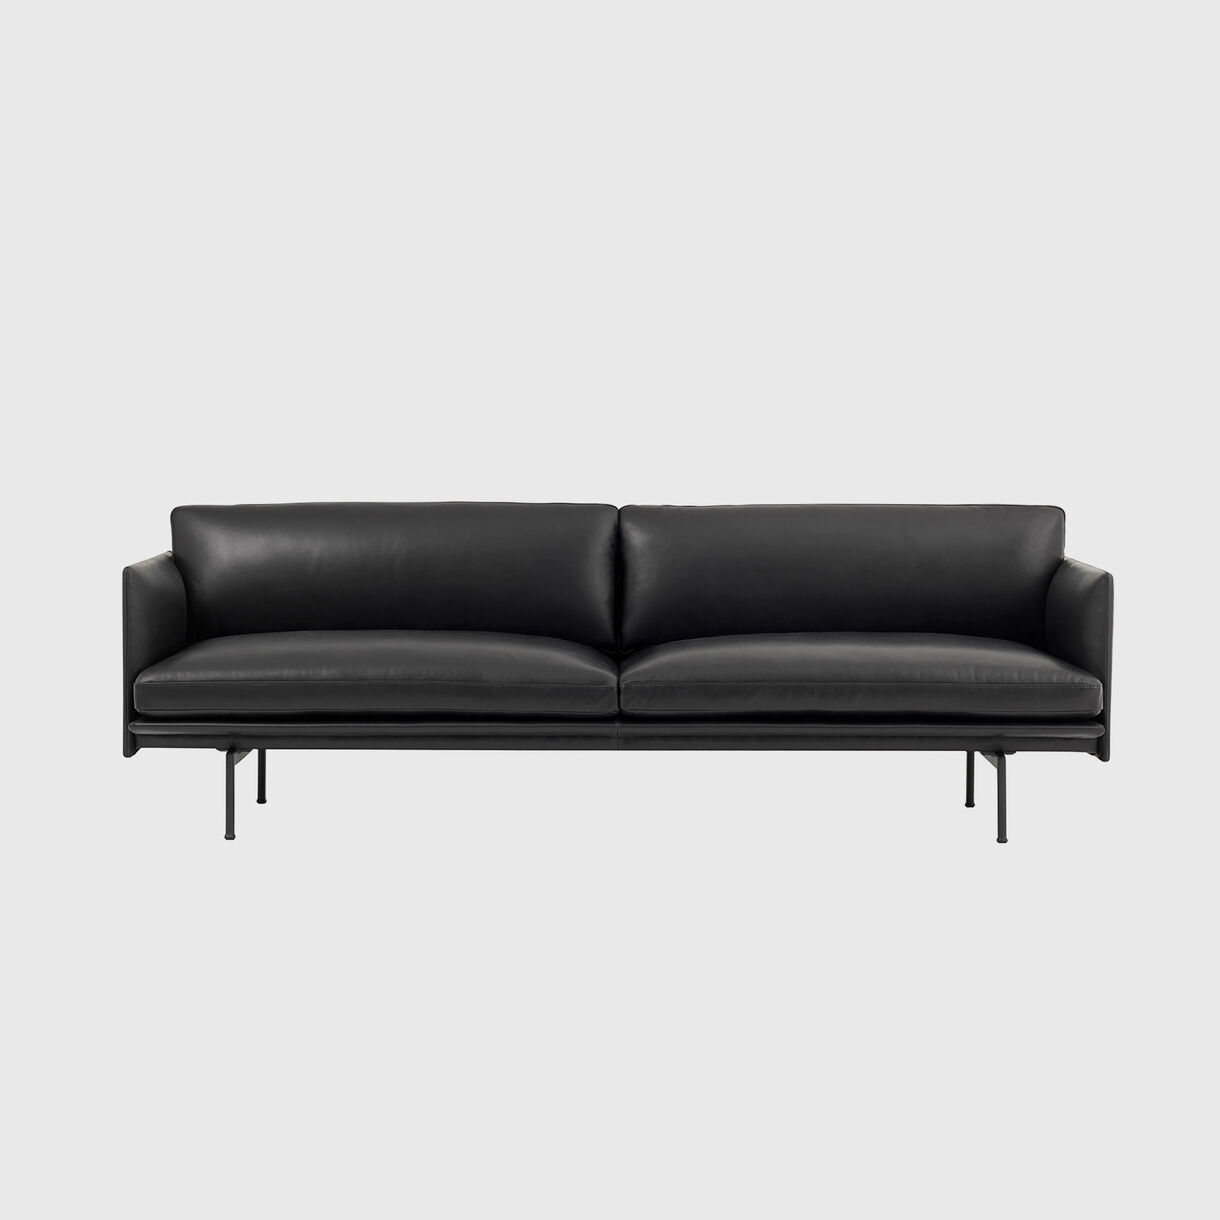 Outline 3 Seater Sofa, Black Leather